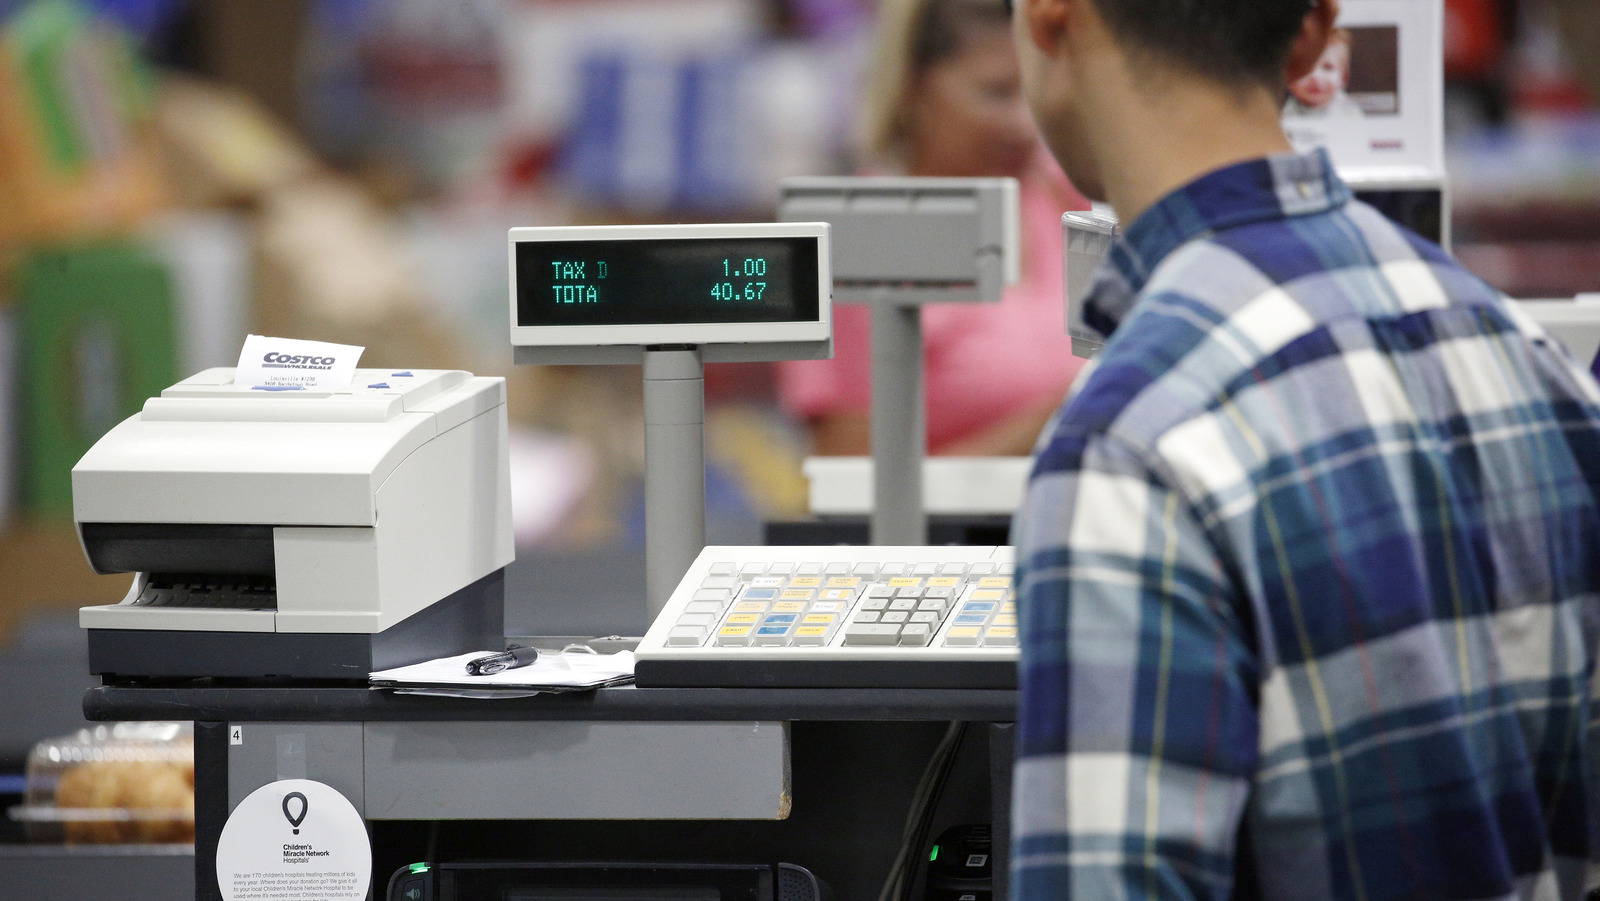 The Dos and Don'ts of Costco's Checkout Etiquette, According to a Superfan